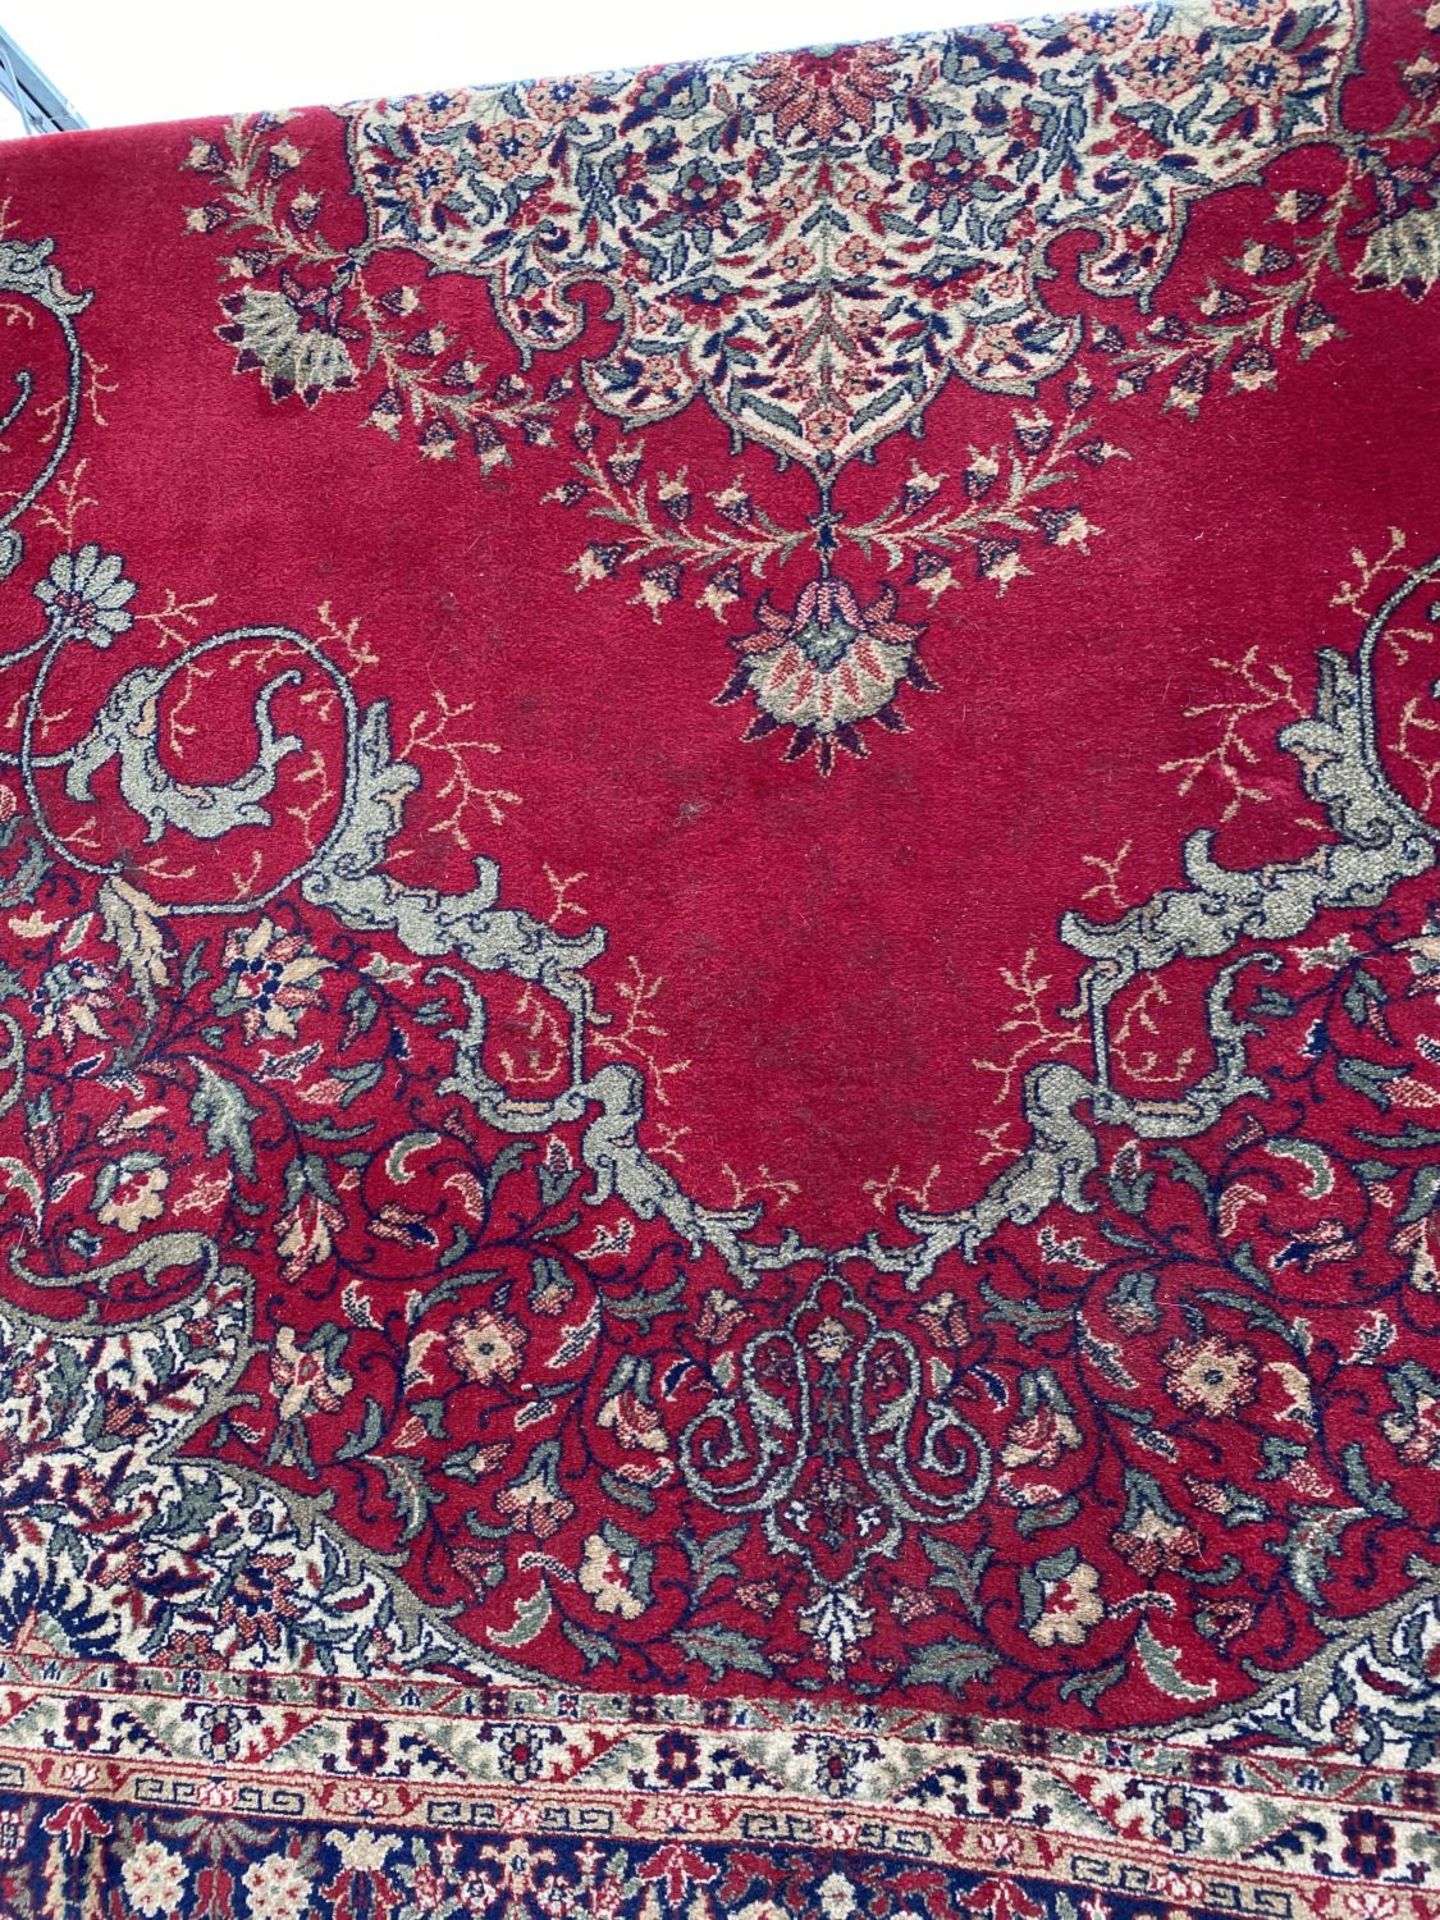 A LARGE VINTAGE RED PATTERNED RUG (3.67M X 4M APPROX) - Image 4 of 5